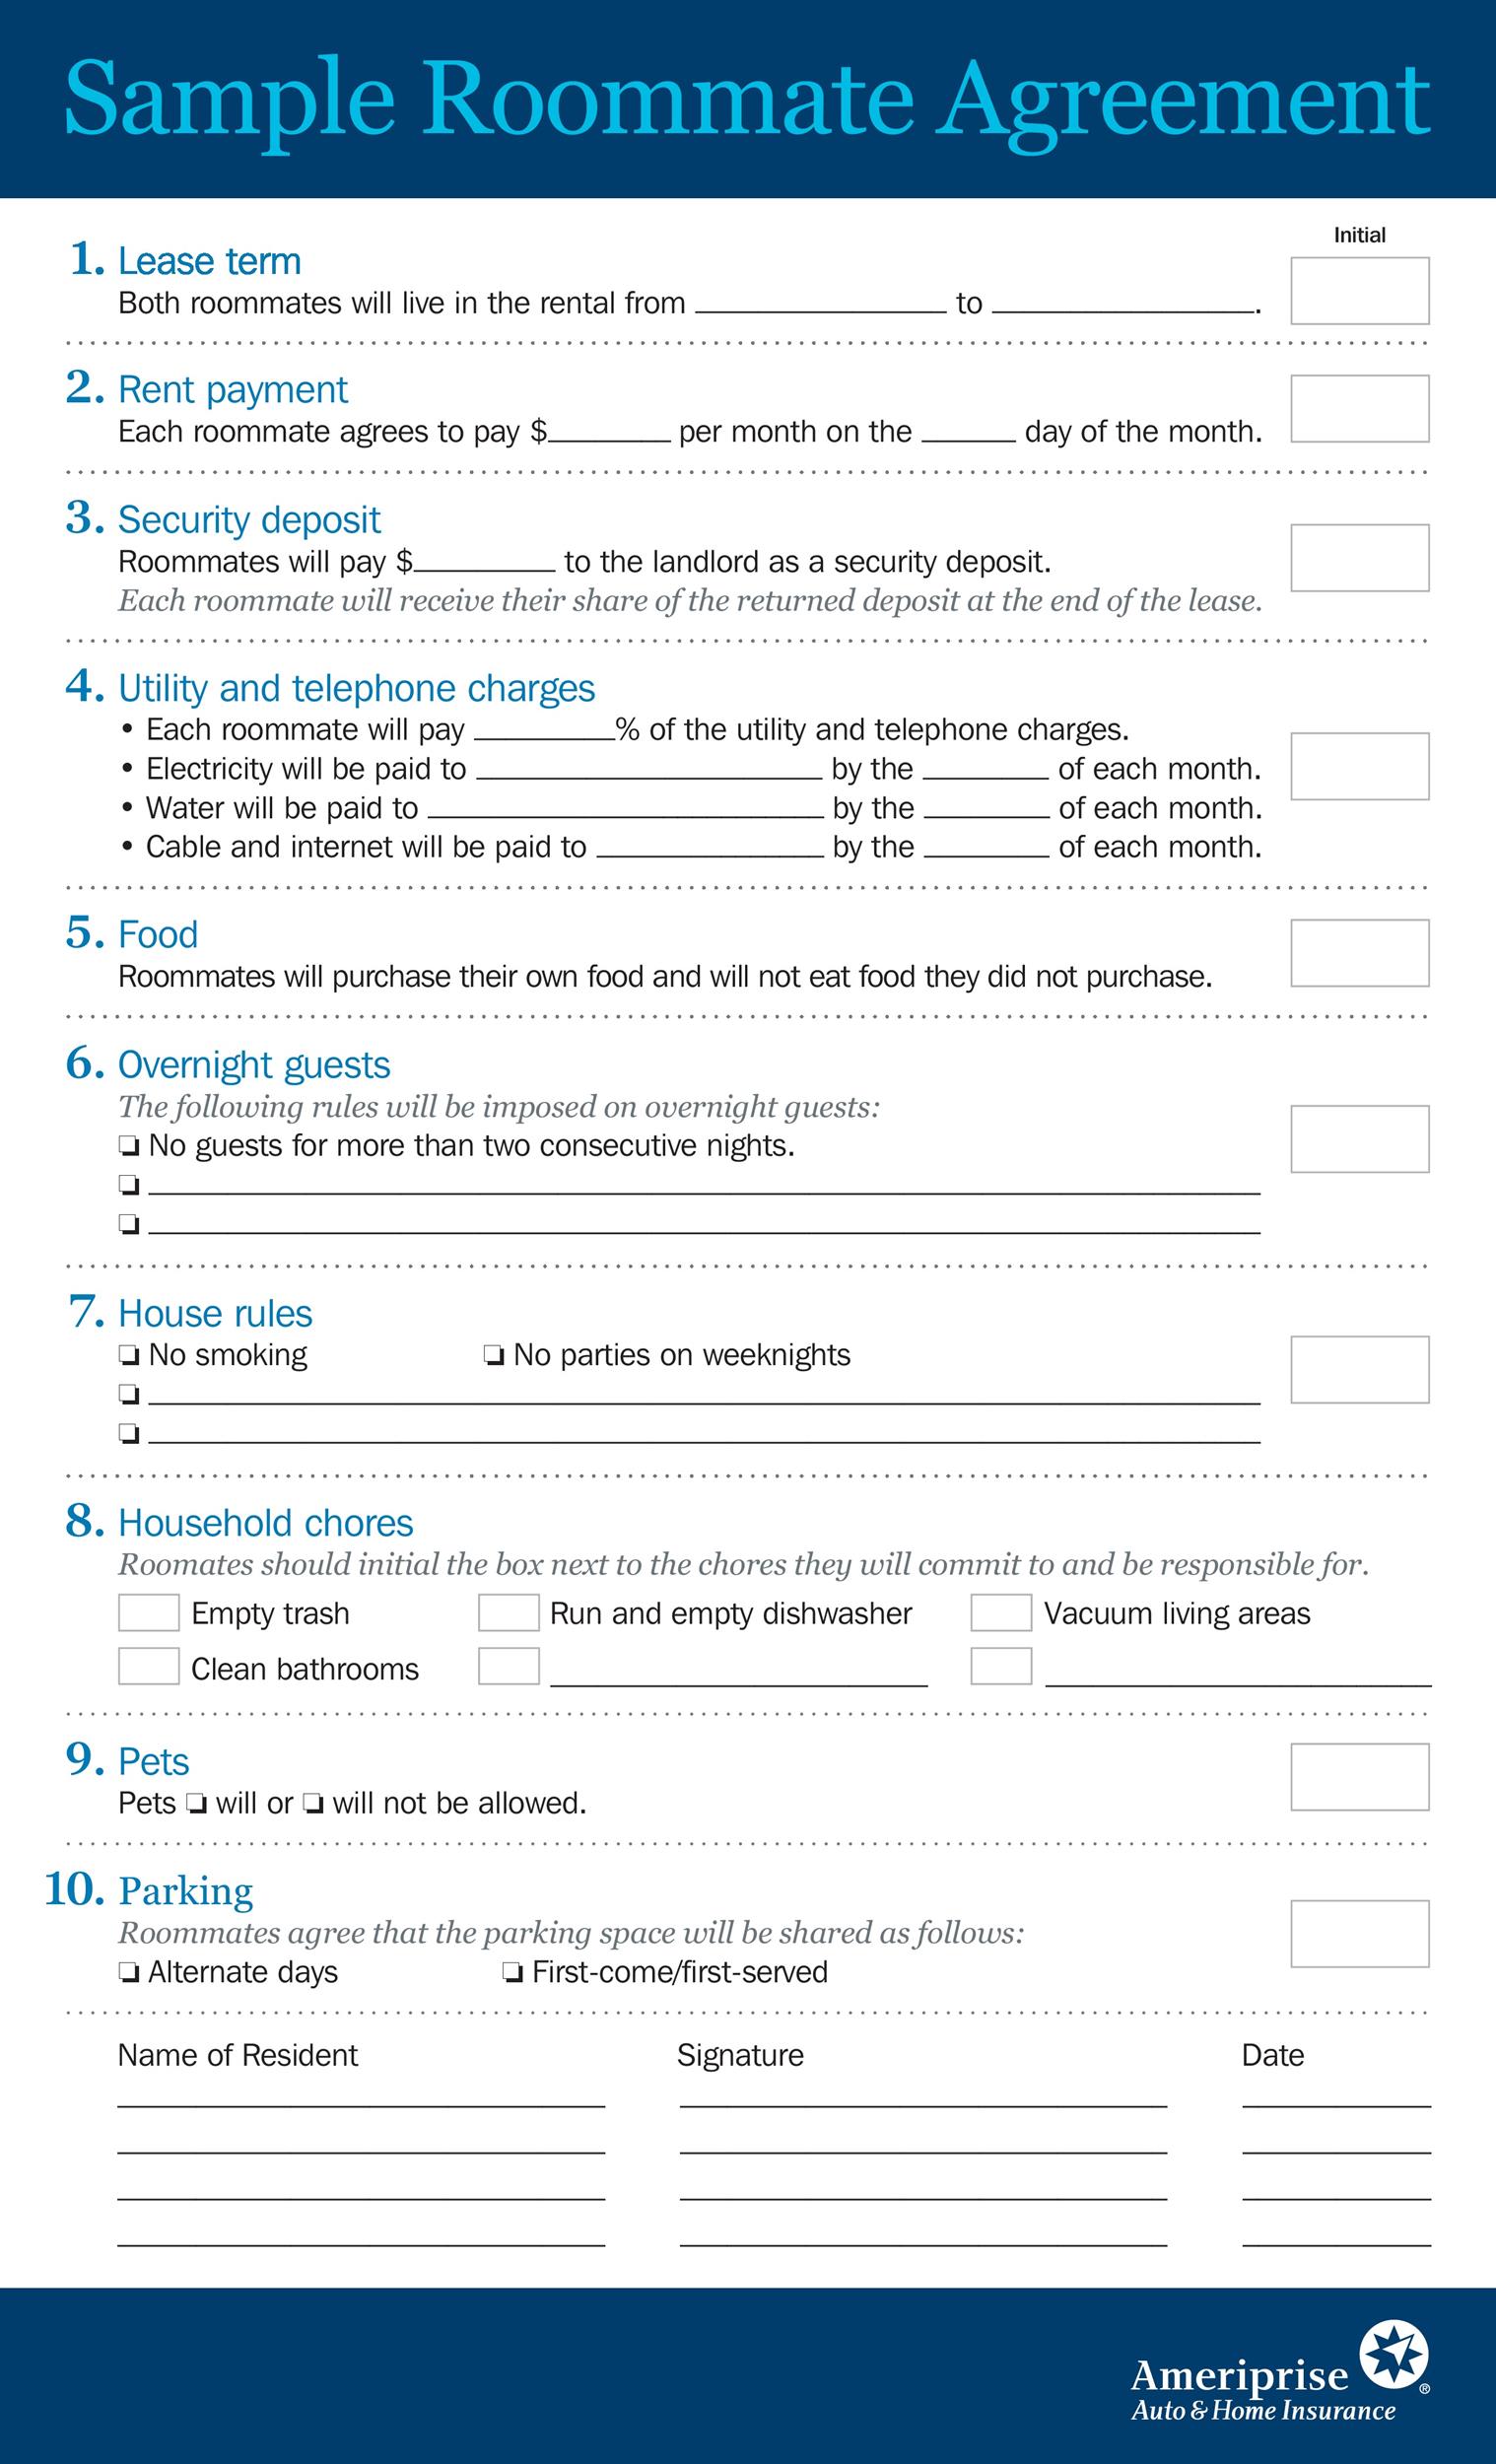 Roommate Agreement Contract Template